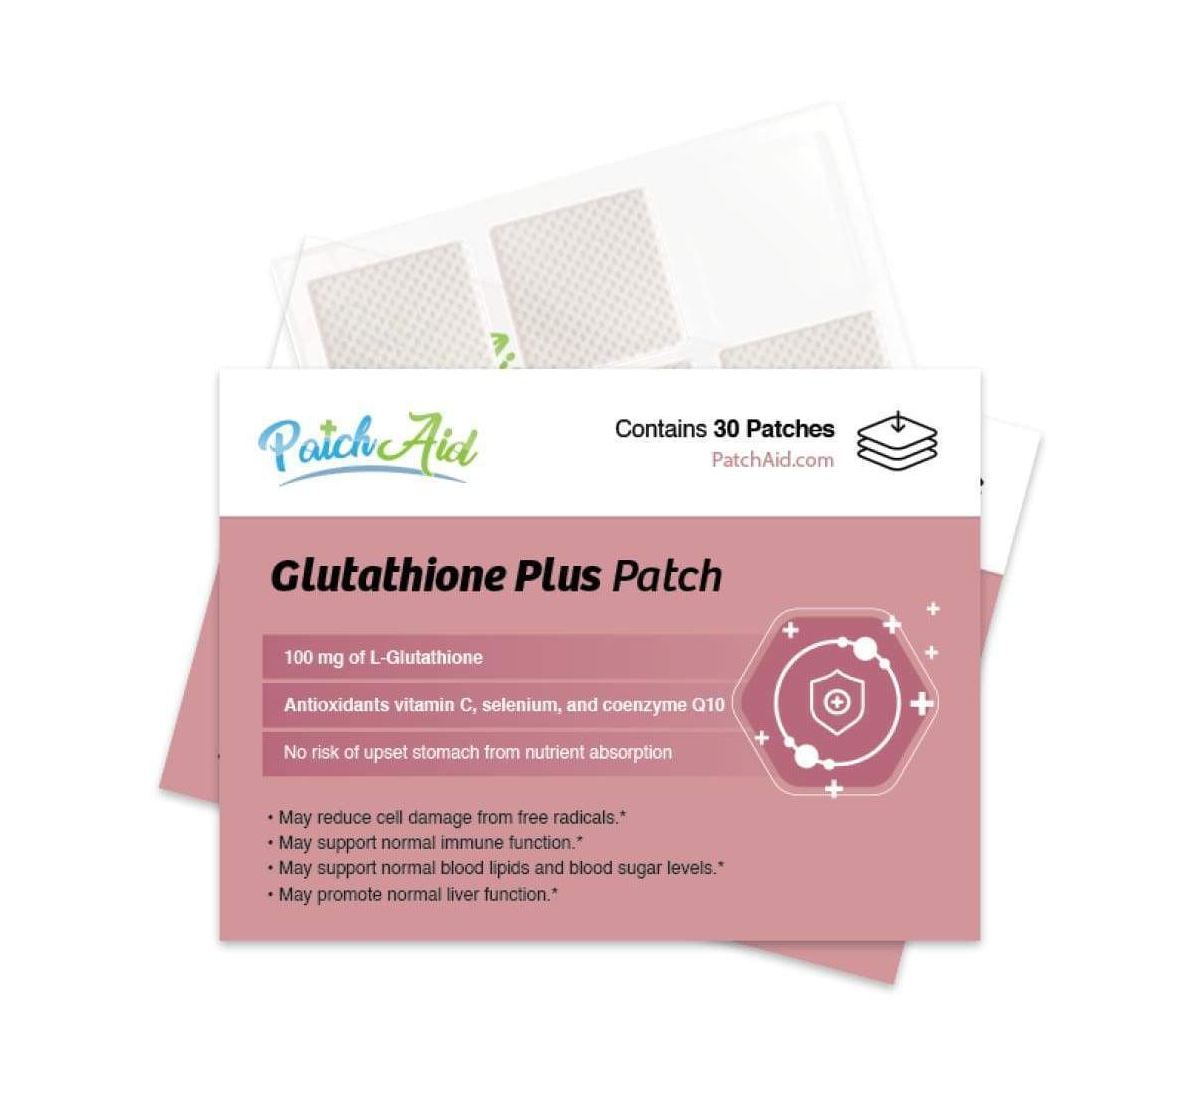 Glutathione Plus Patch by PatchAid (30-Day Supply) - White